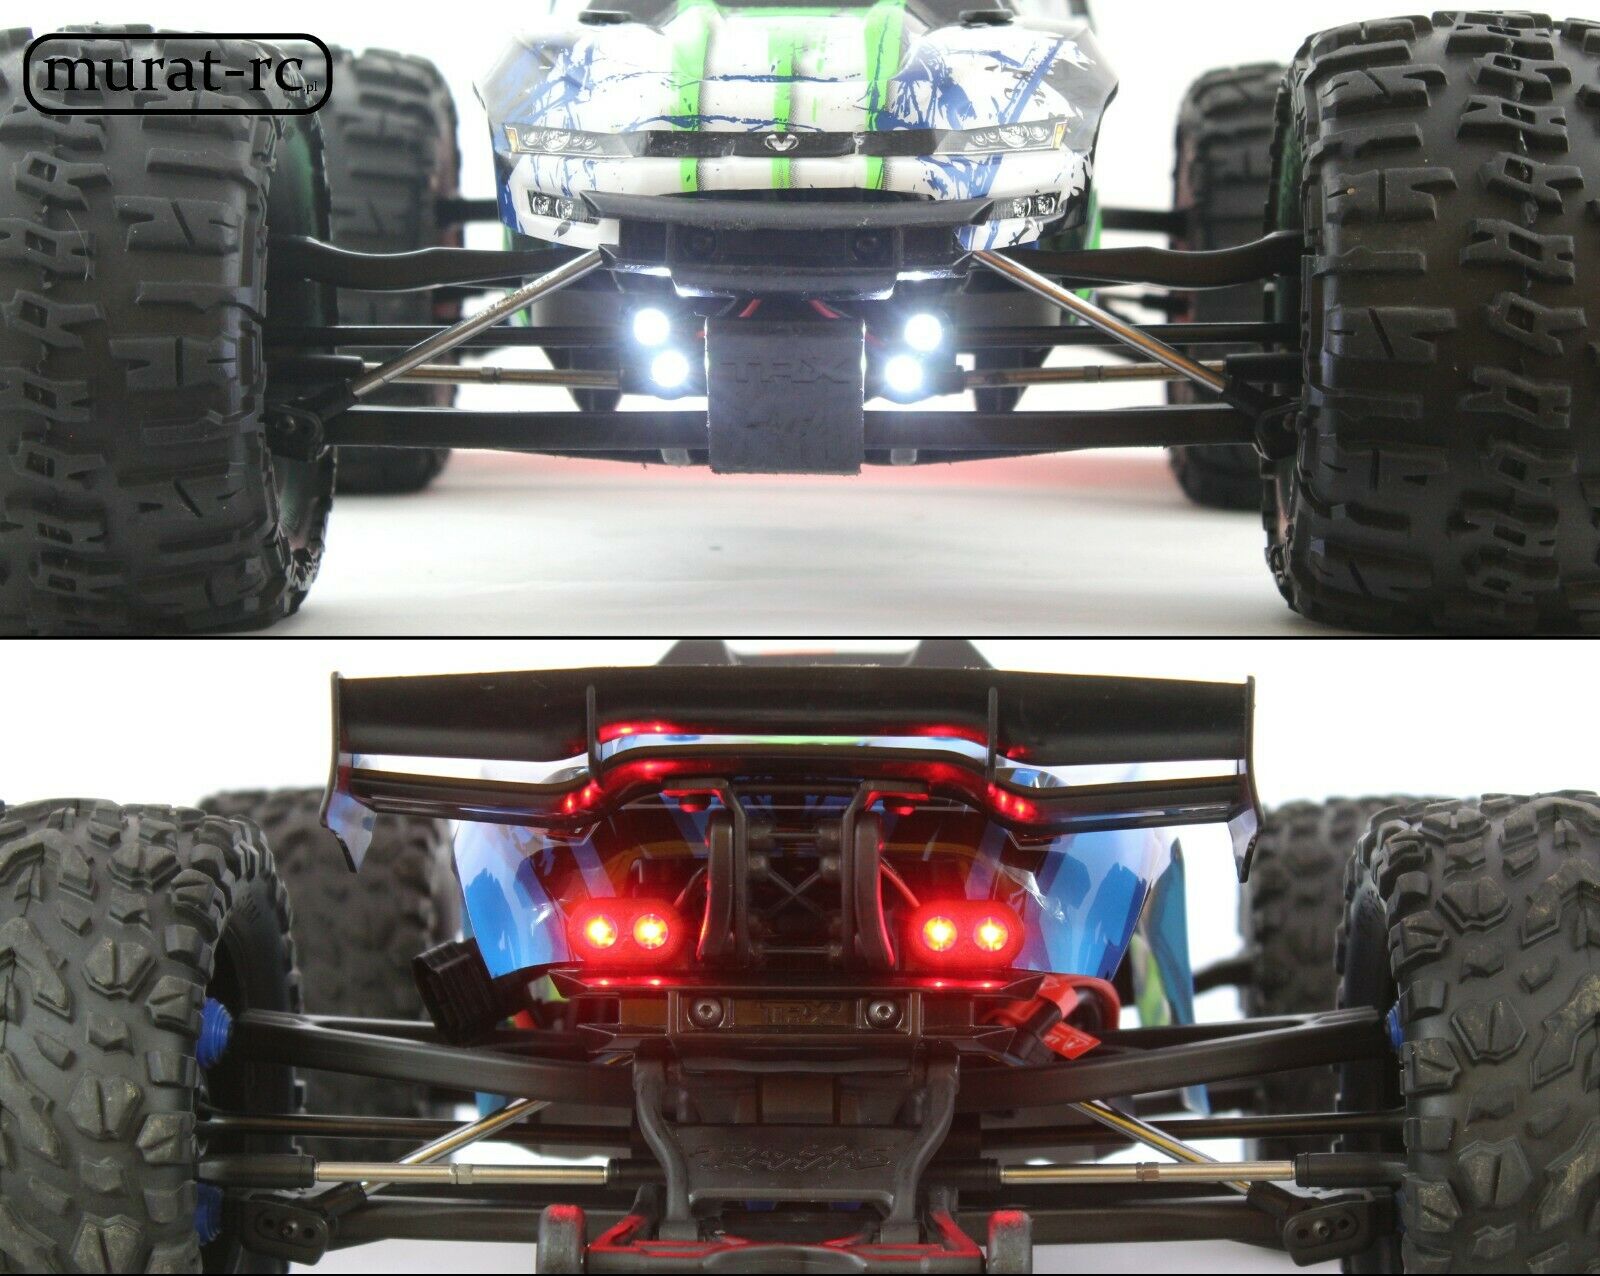 Led Lights Front And Rear Traxxas E-revo 1.0 2.0 Vxl 1/10 Waterproof By Murat-rc